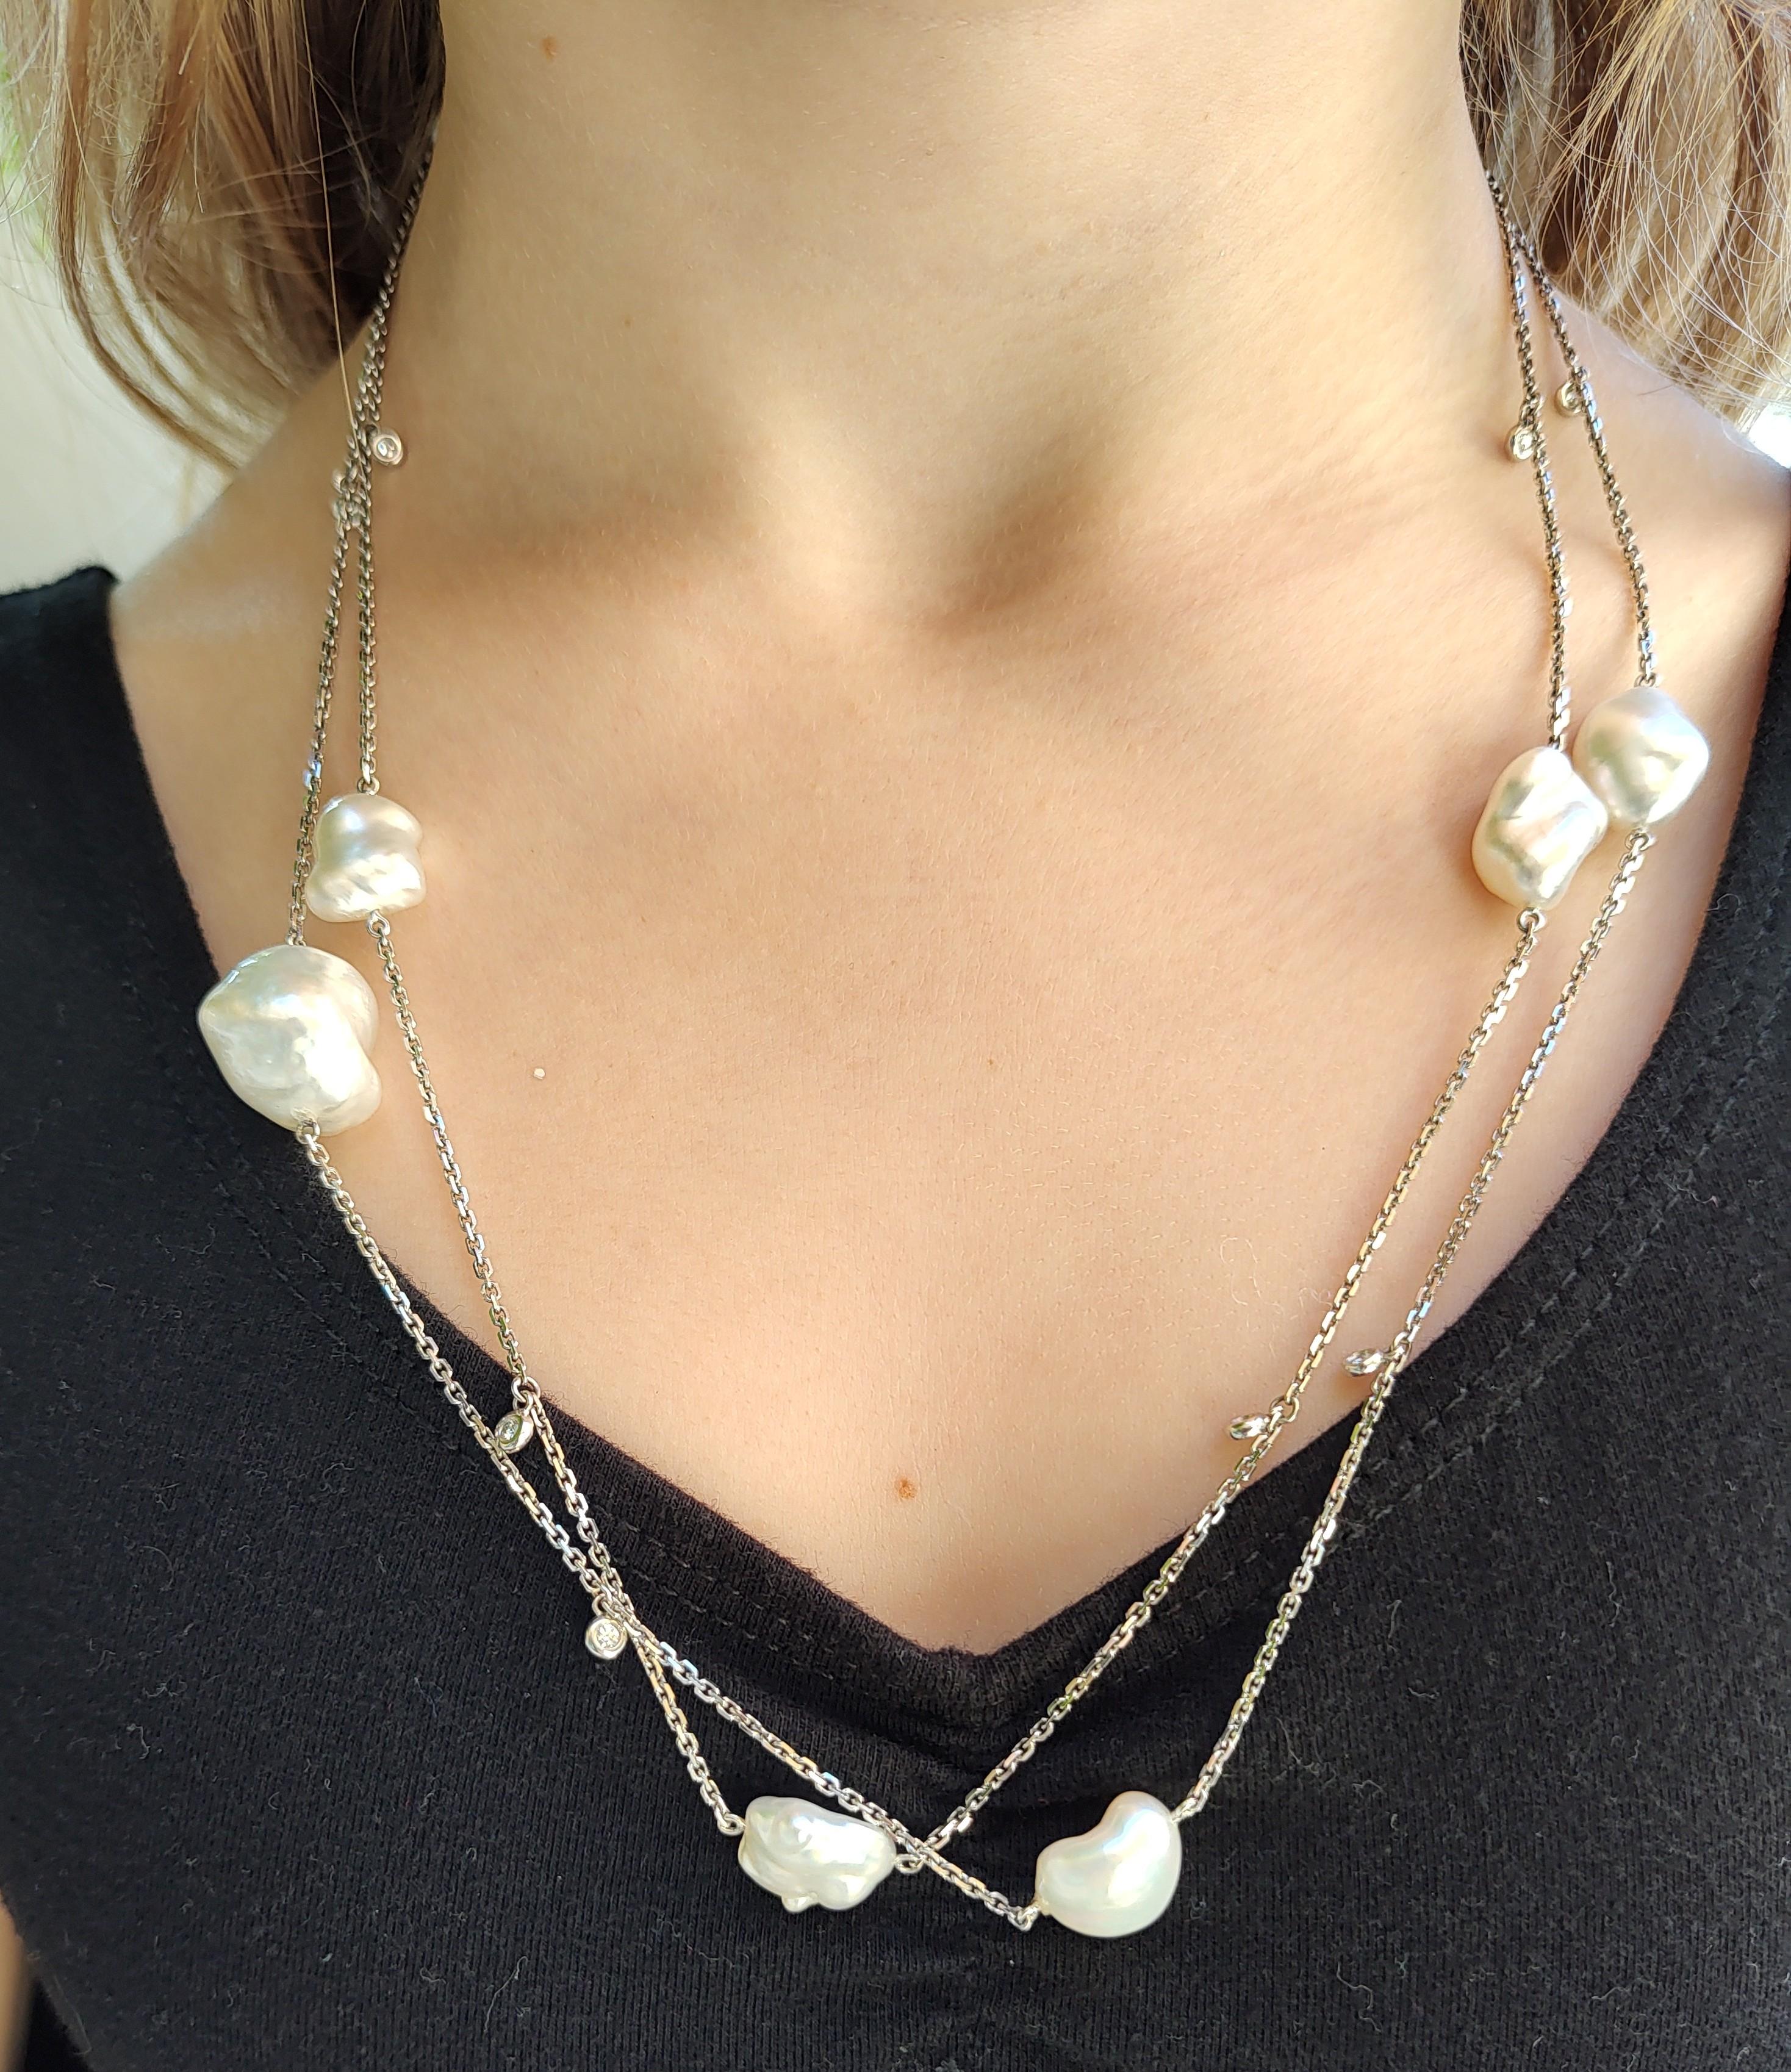 Handmade 18ct white gold Keshi and diamond pearl necklace. Can be worn single long or double short.
Keshi Pearls are highly prized and very valuable because of their remarkable lustre.
Australian Keshi Pearls are rare, unique and beautiful! They are